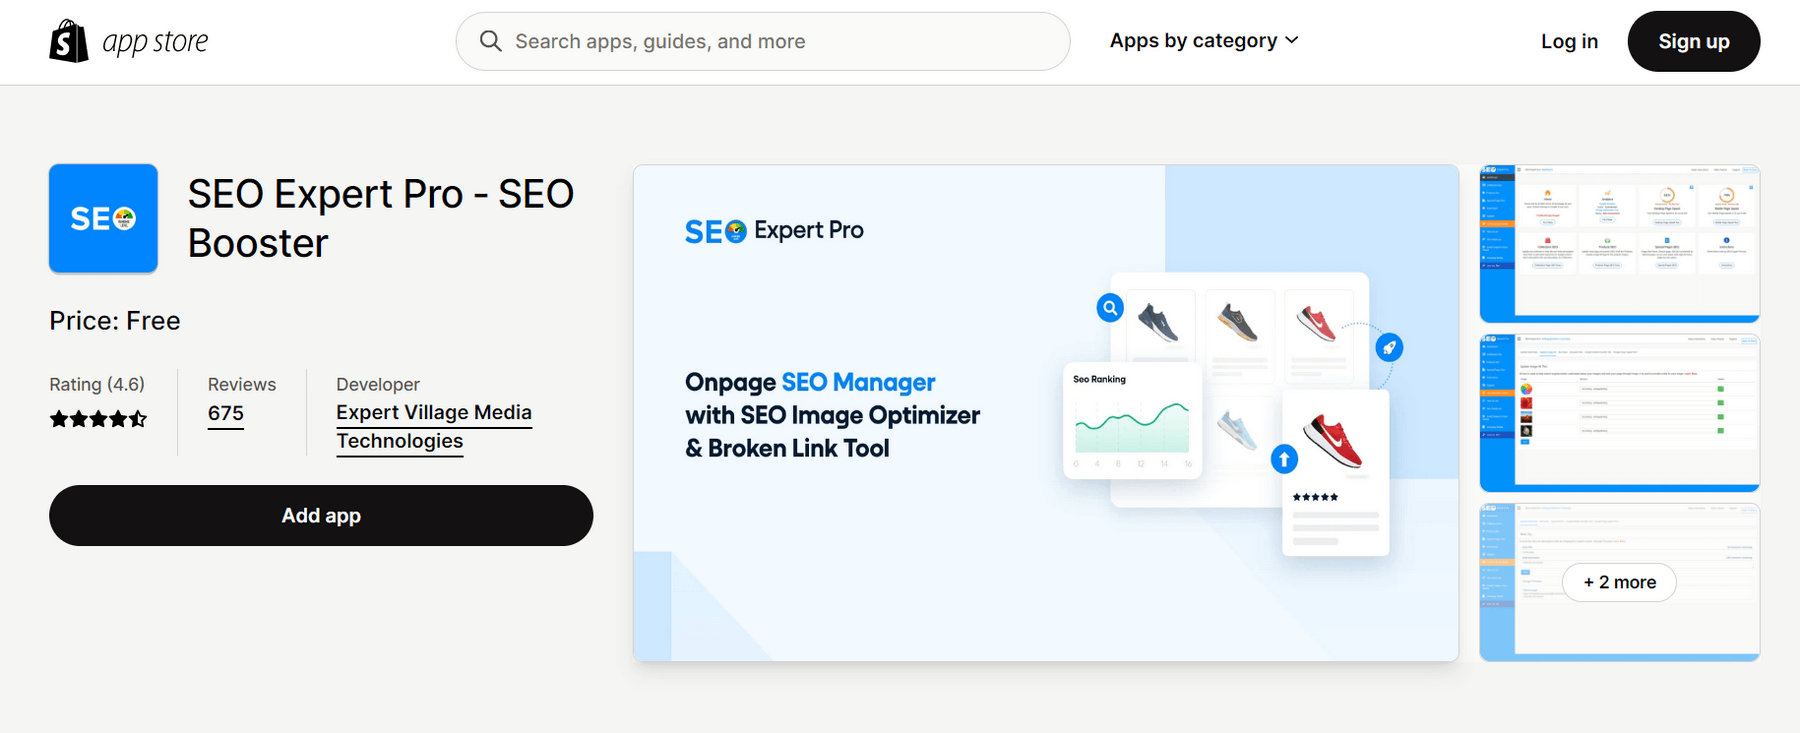 seo apps for shopify - SEO Expert Pro ‑ SEO Booster